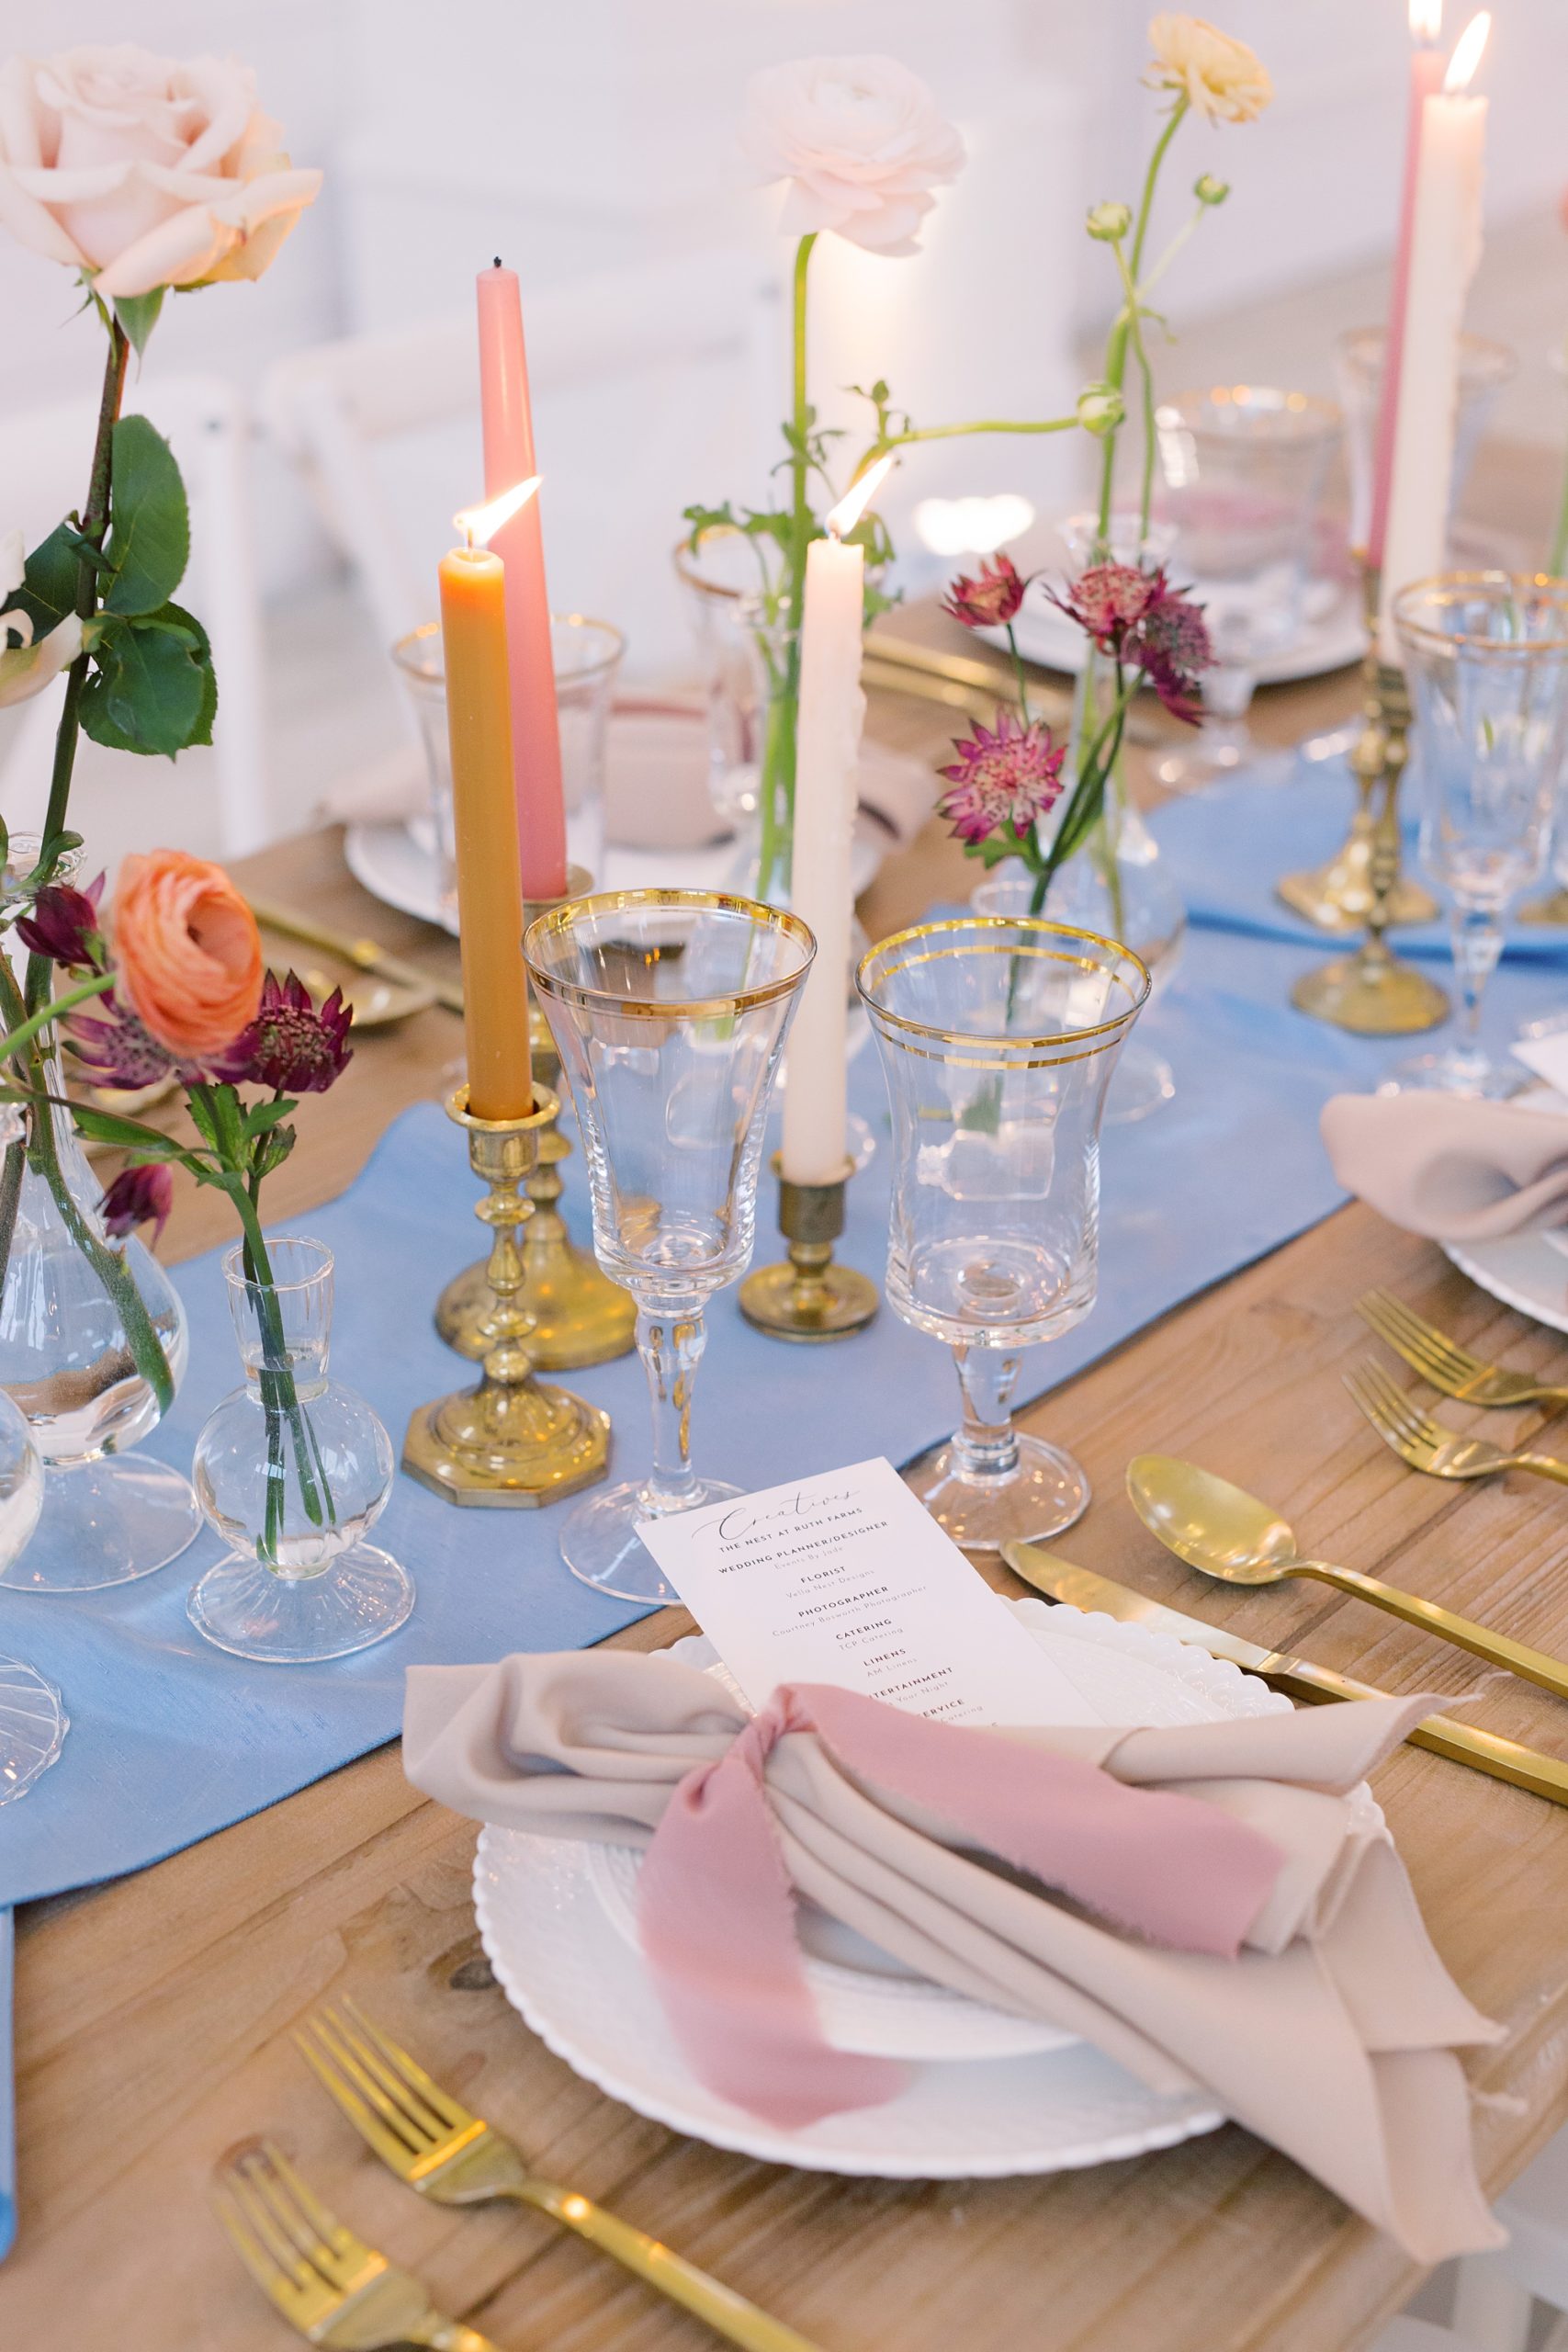 romantic wedding reception inspiration with pale blue table runner and pink napkins